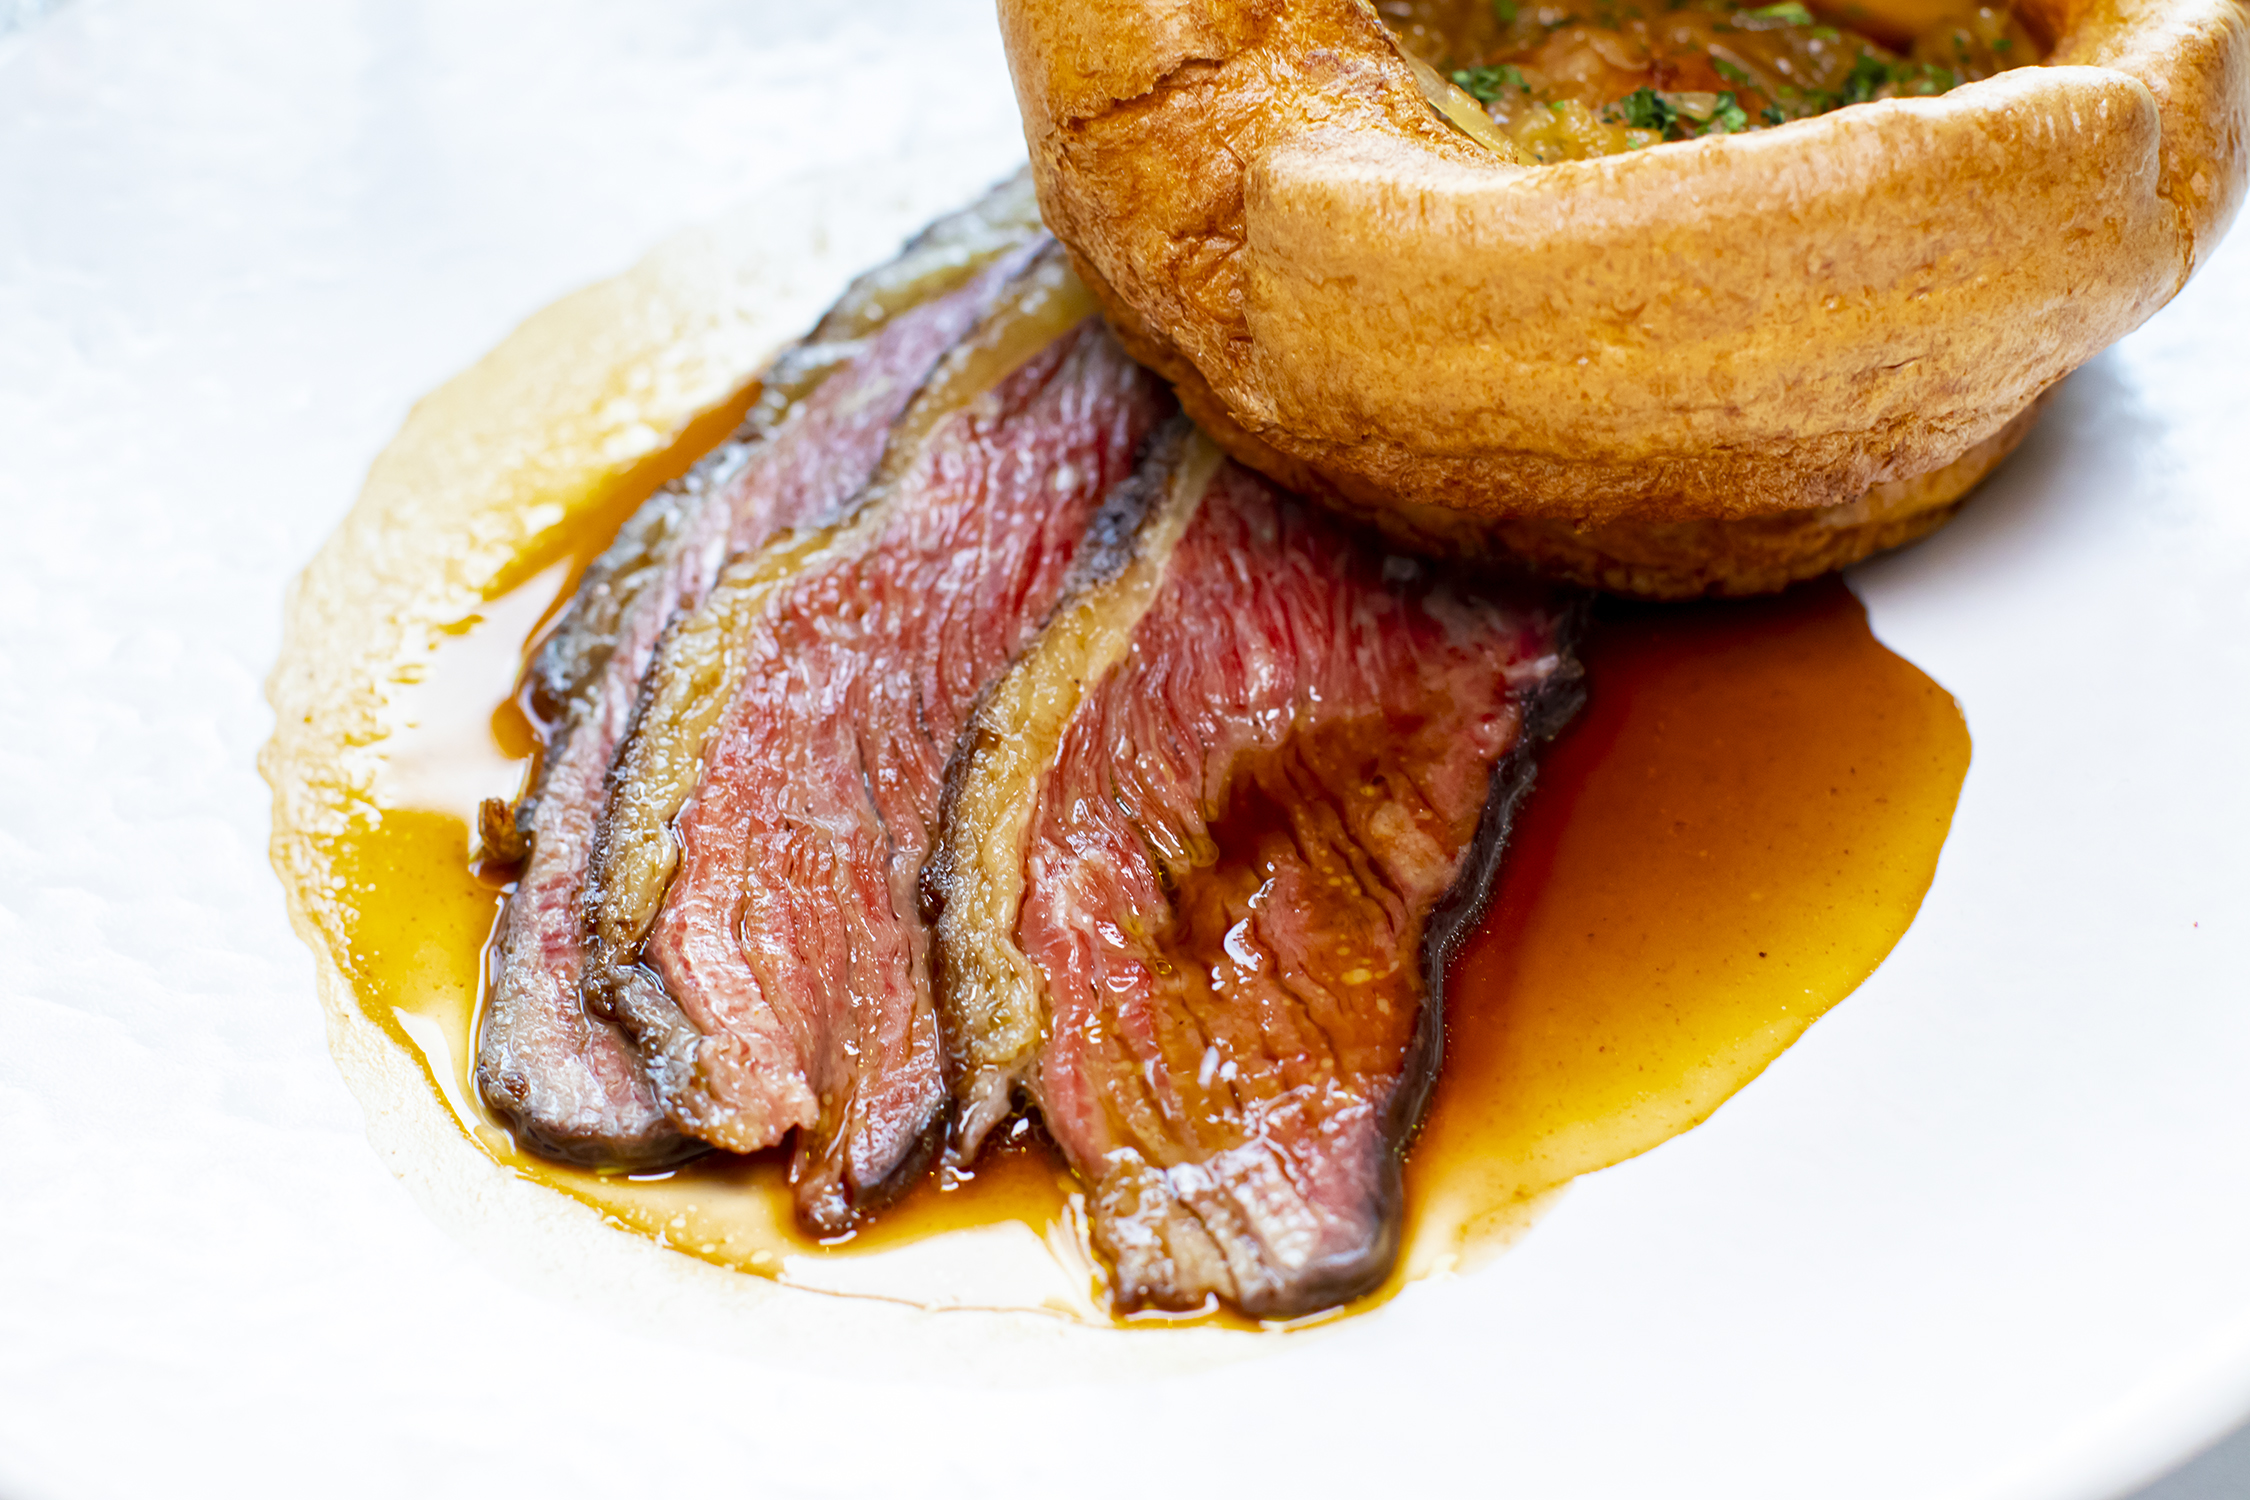 Luxurious Sunday Lunch in The Heart of Mayfair